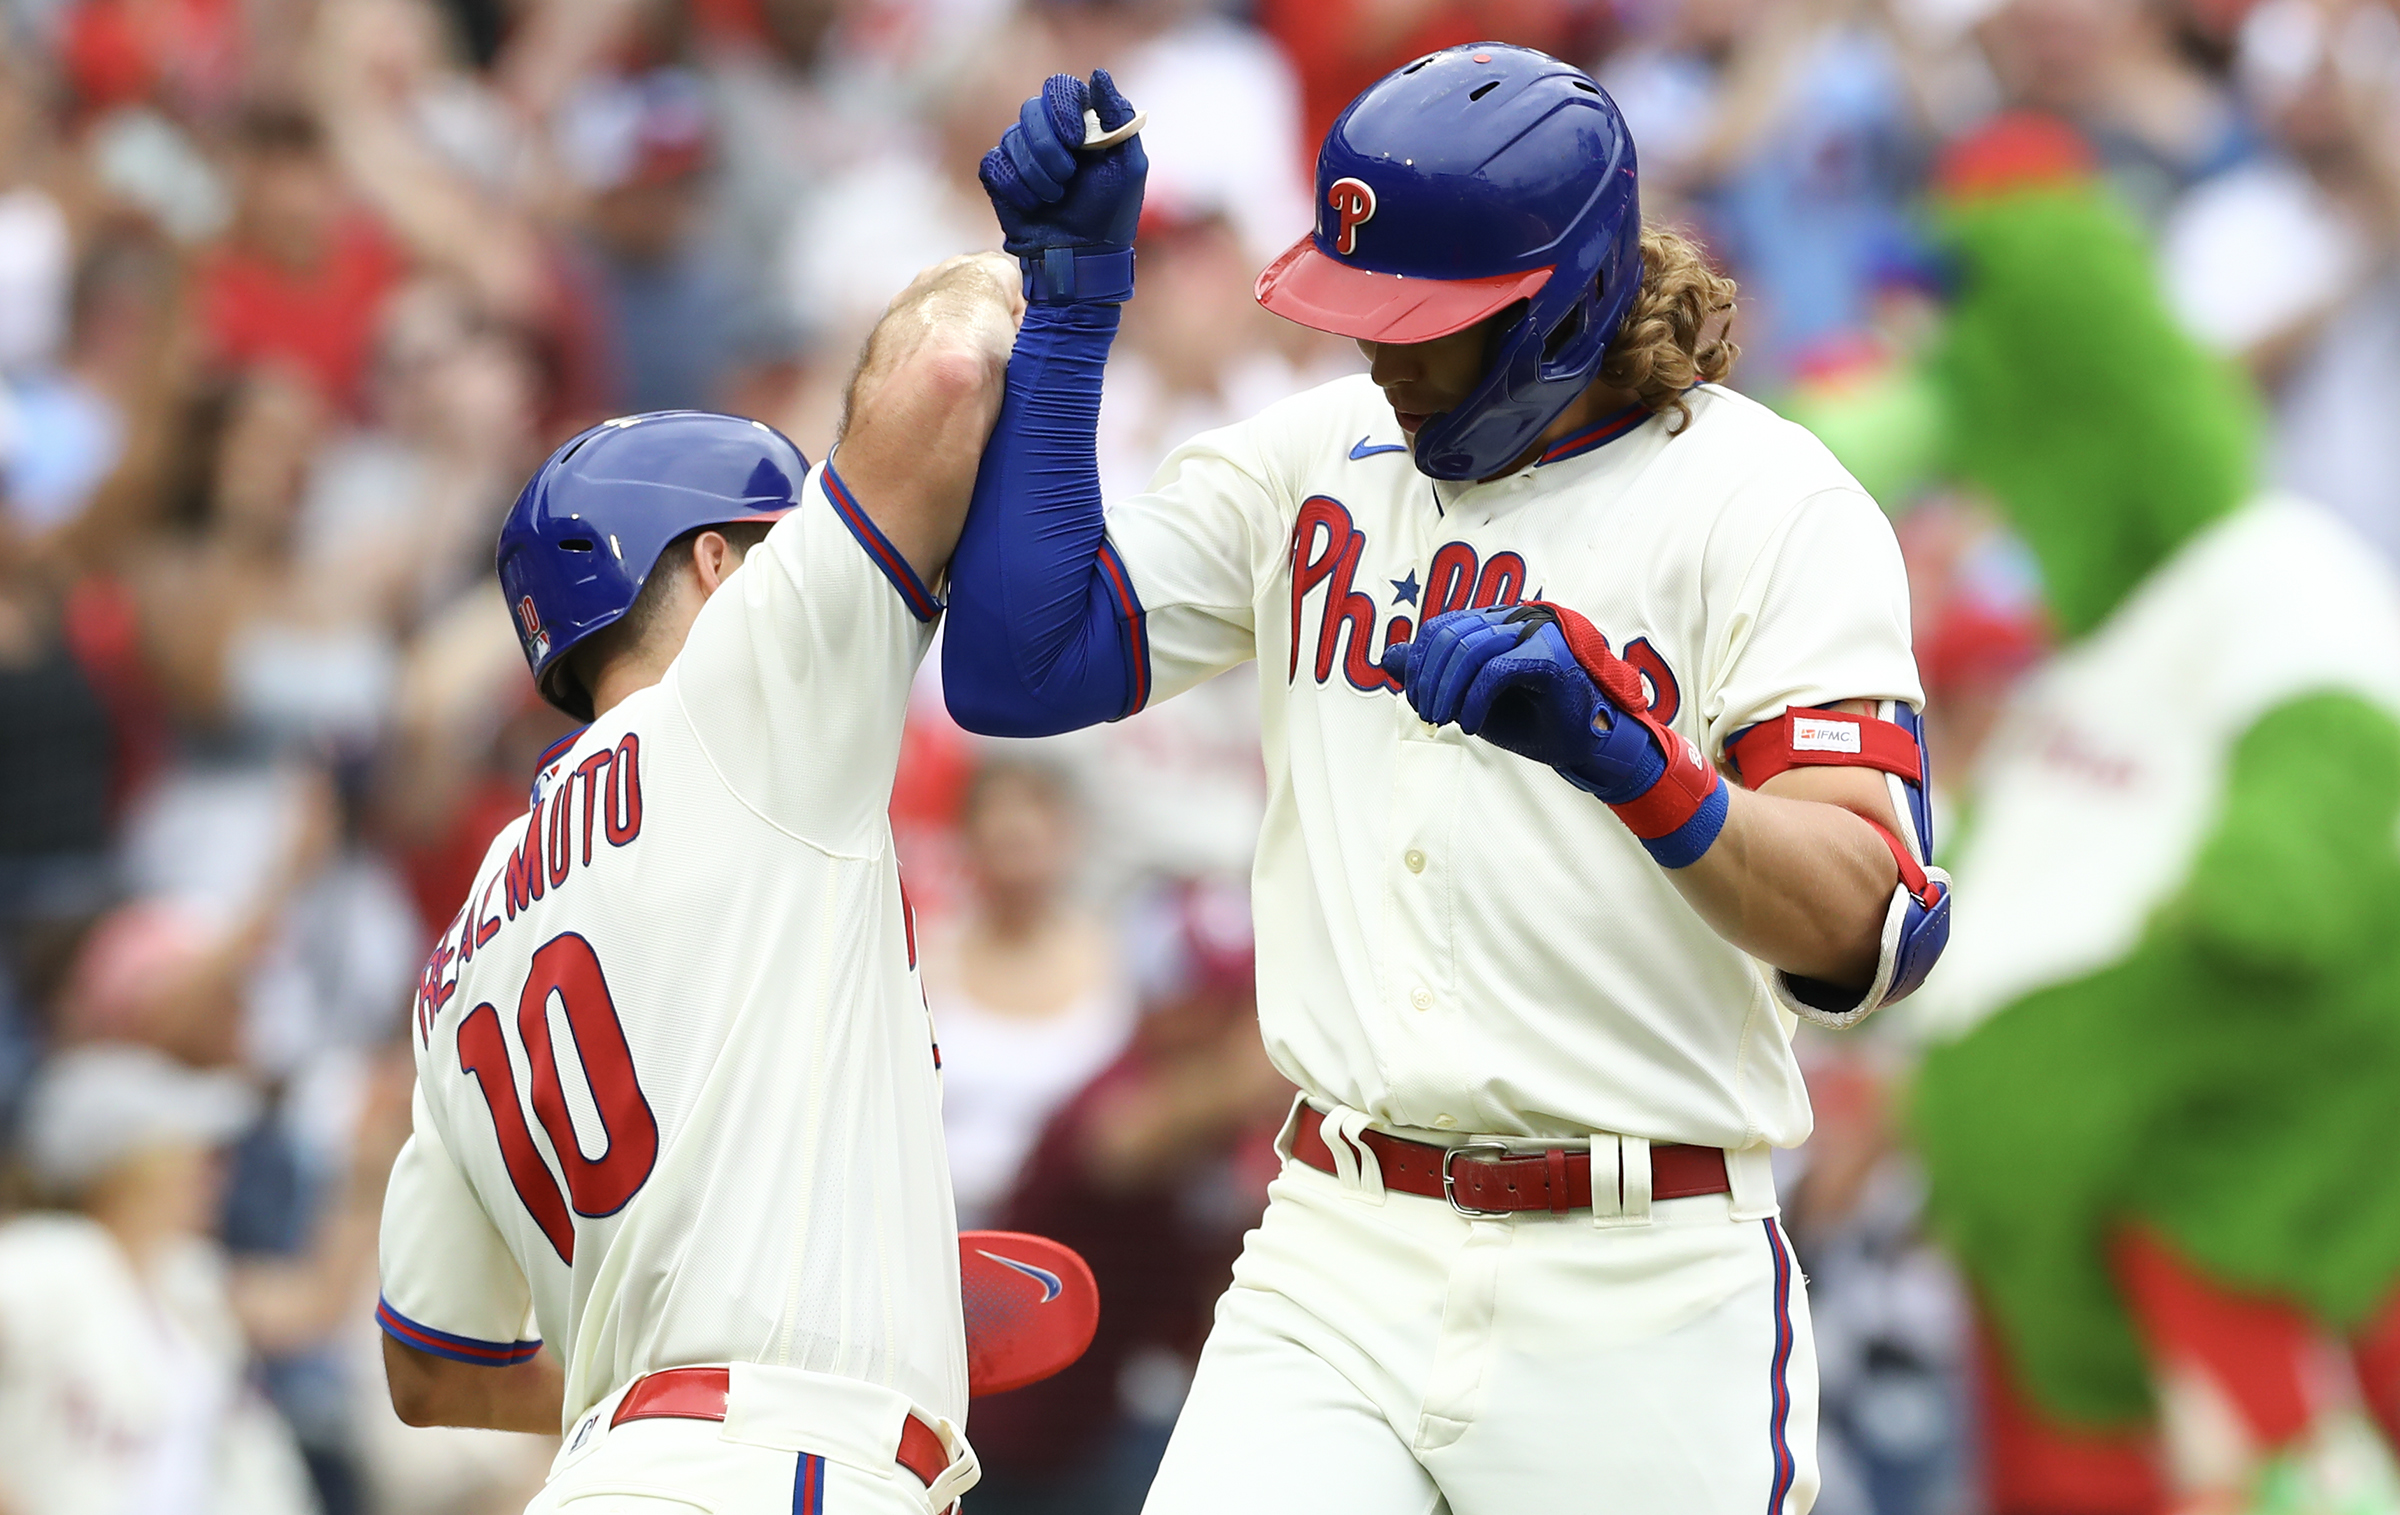 Bohm has 6 RBIs, Phillies score most runs in 5 years with 19-4 rout of  Nationals